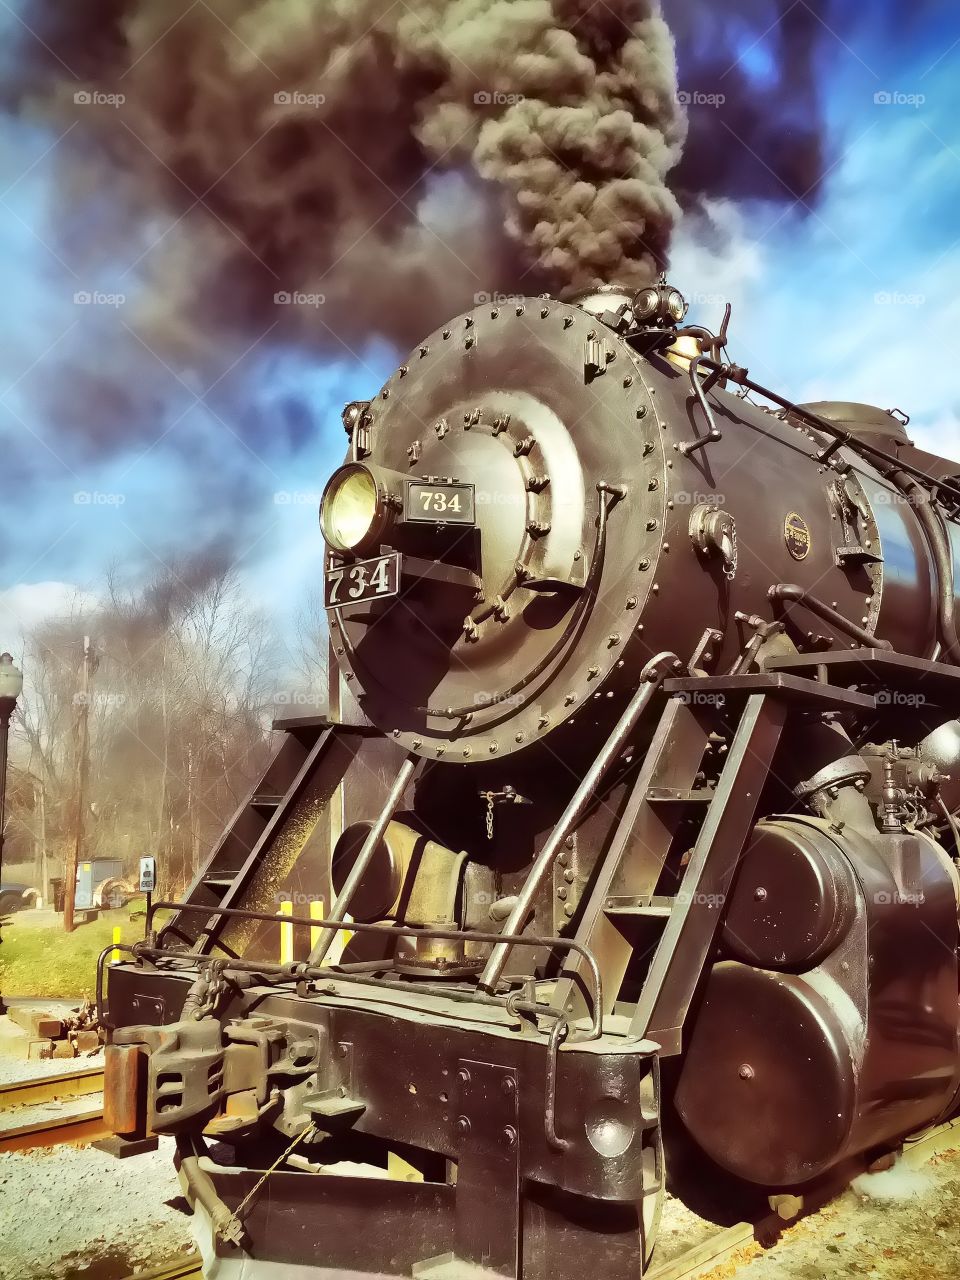 A steam engine pulling a train on the railroad tracks. 